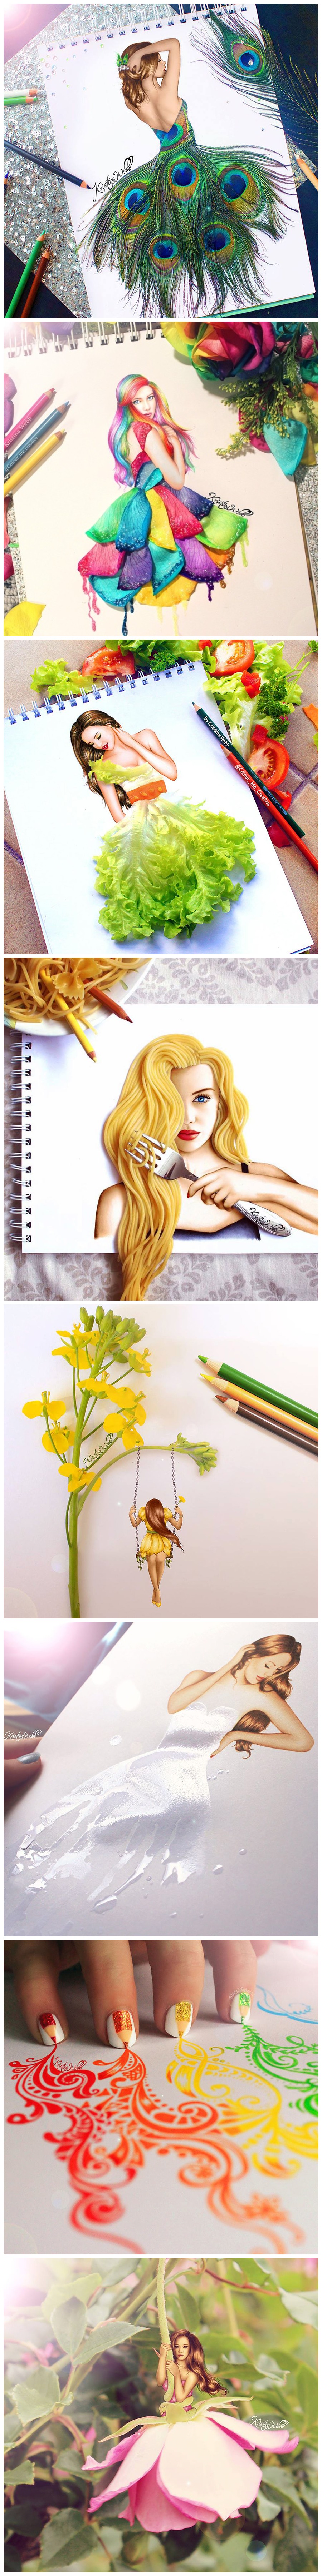 illustrations-real-objects-kristina